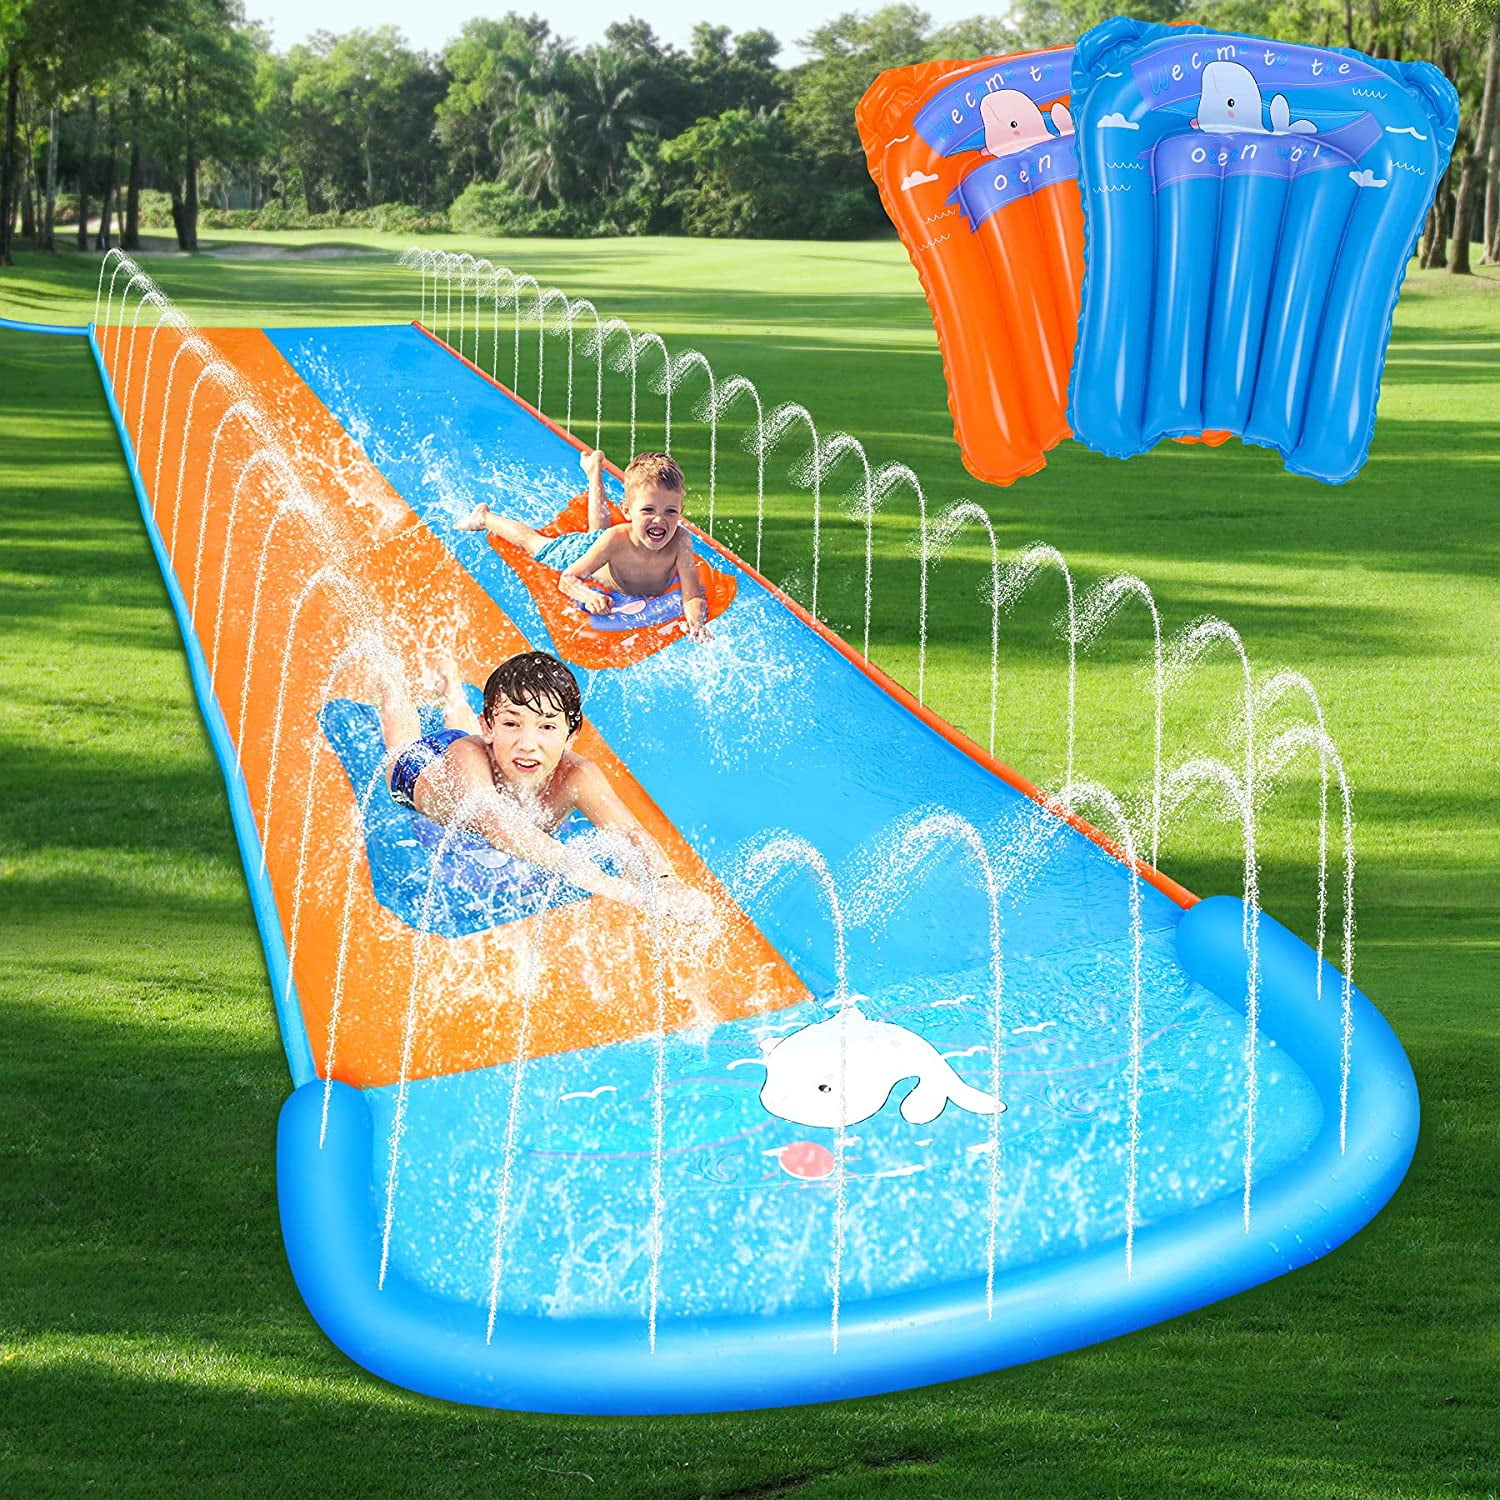 Aromonde Water Slide Lawn Waterslide Double Lane Slip for Backyards 18Ft Durable Quality PVC Water Toy Waterslide with Sprinkler Gift for Kids Boys Girls Outdoor Summer Toy 2021 Style Fruit Pattern 